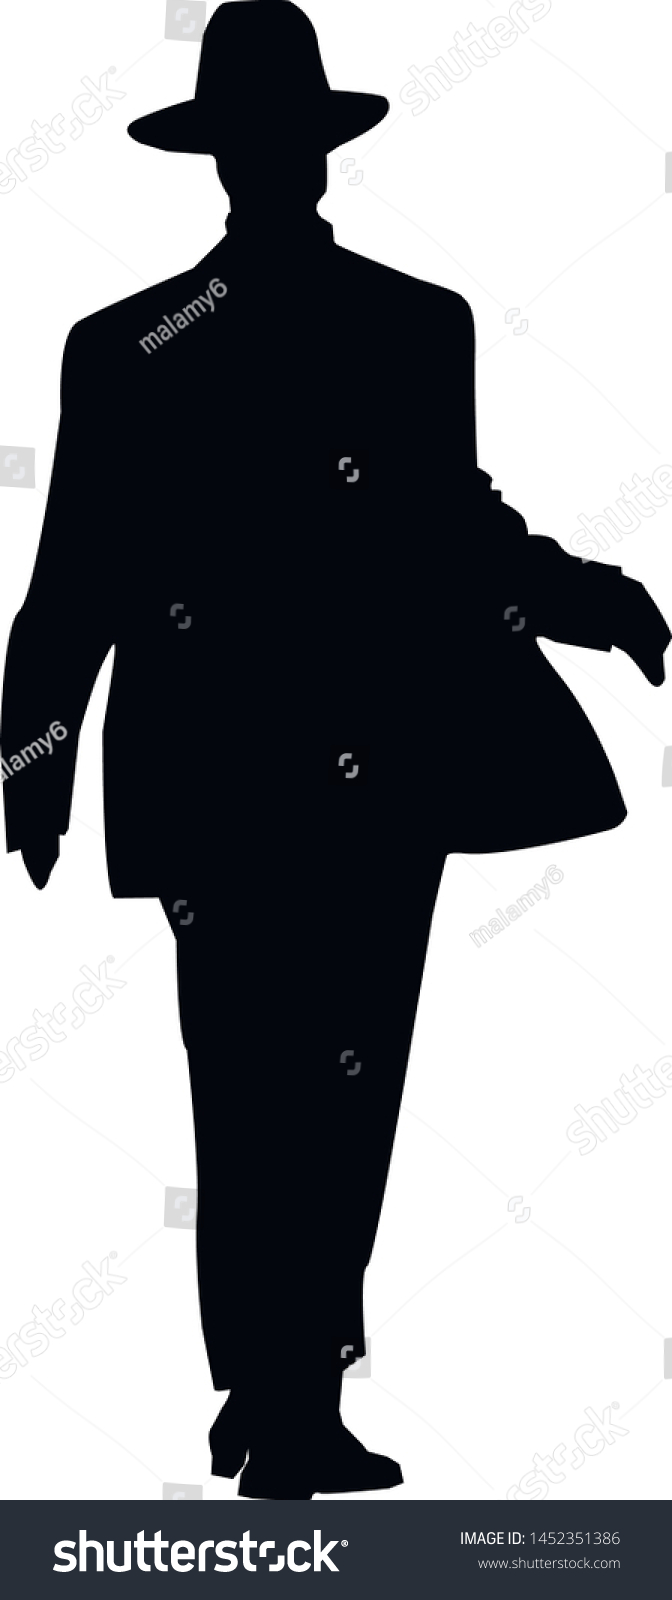 Silhouette Hasidic Jew Religious Jew Young Stock Vector (Royalty Free ...